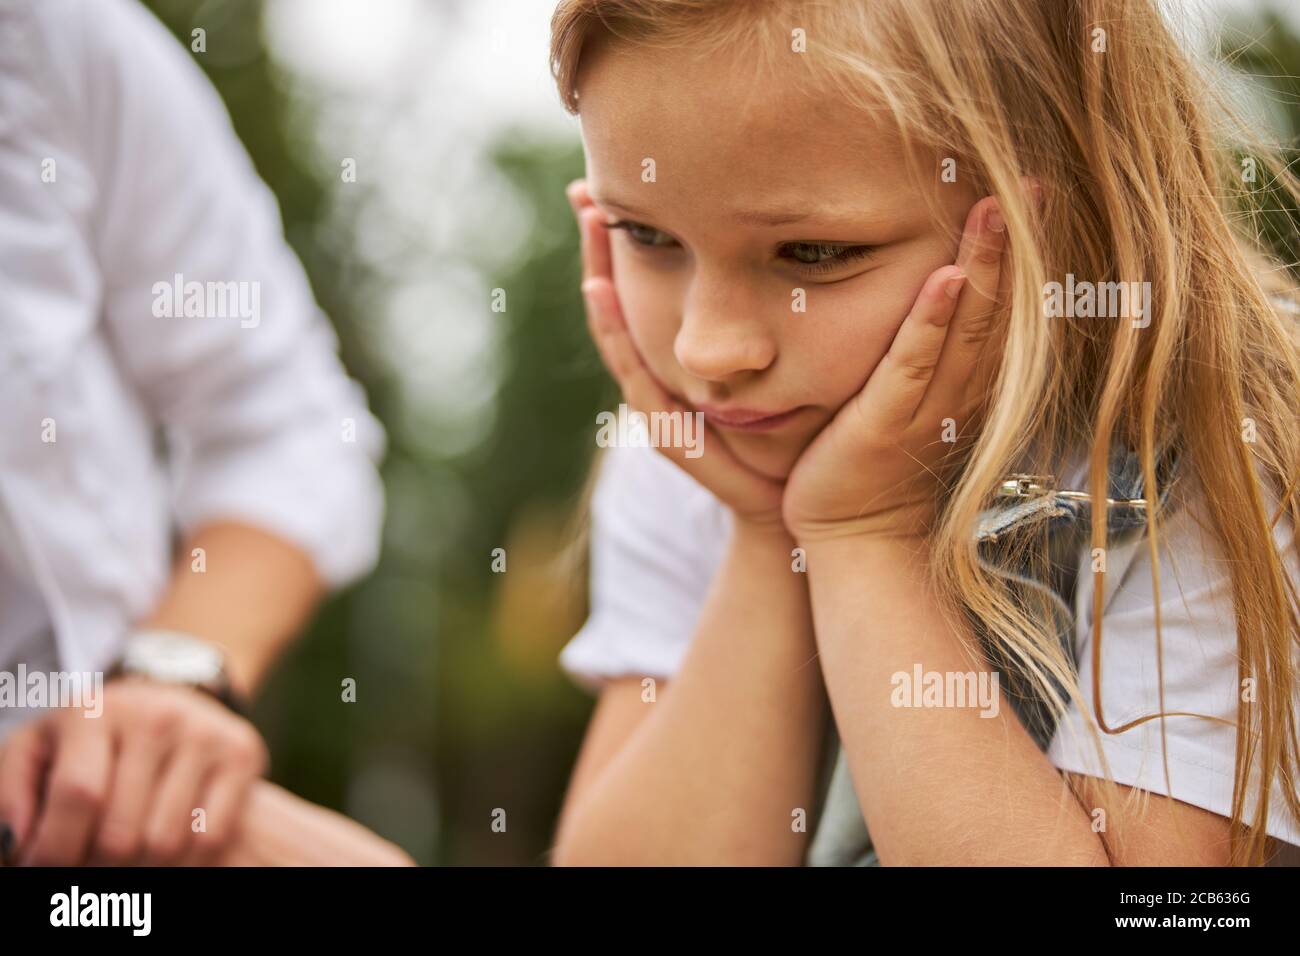 Sad girl is holding hands under chin Stock Photo